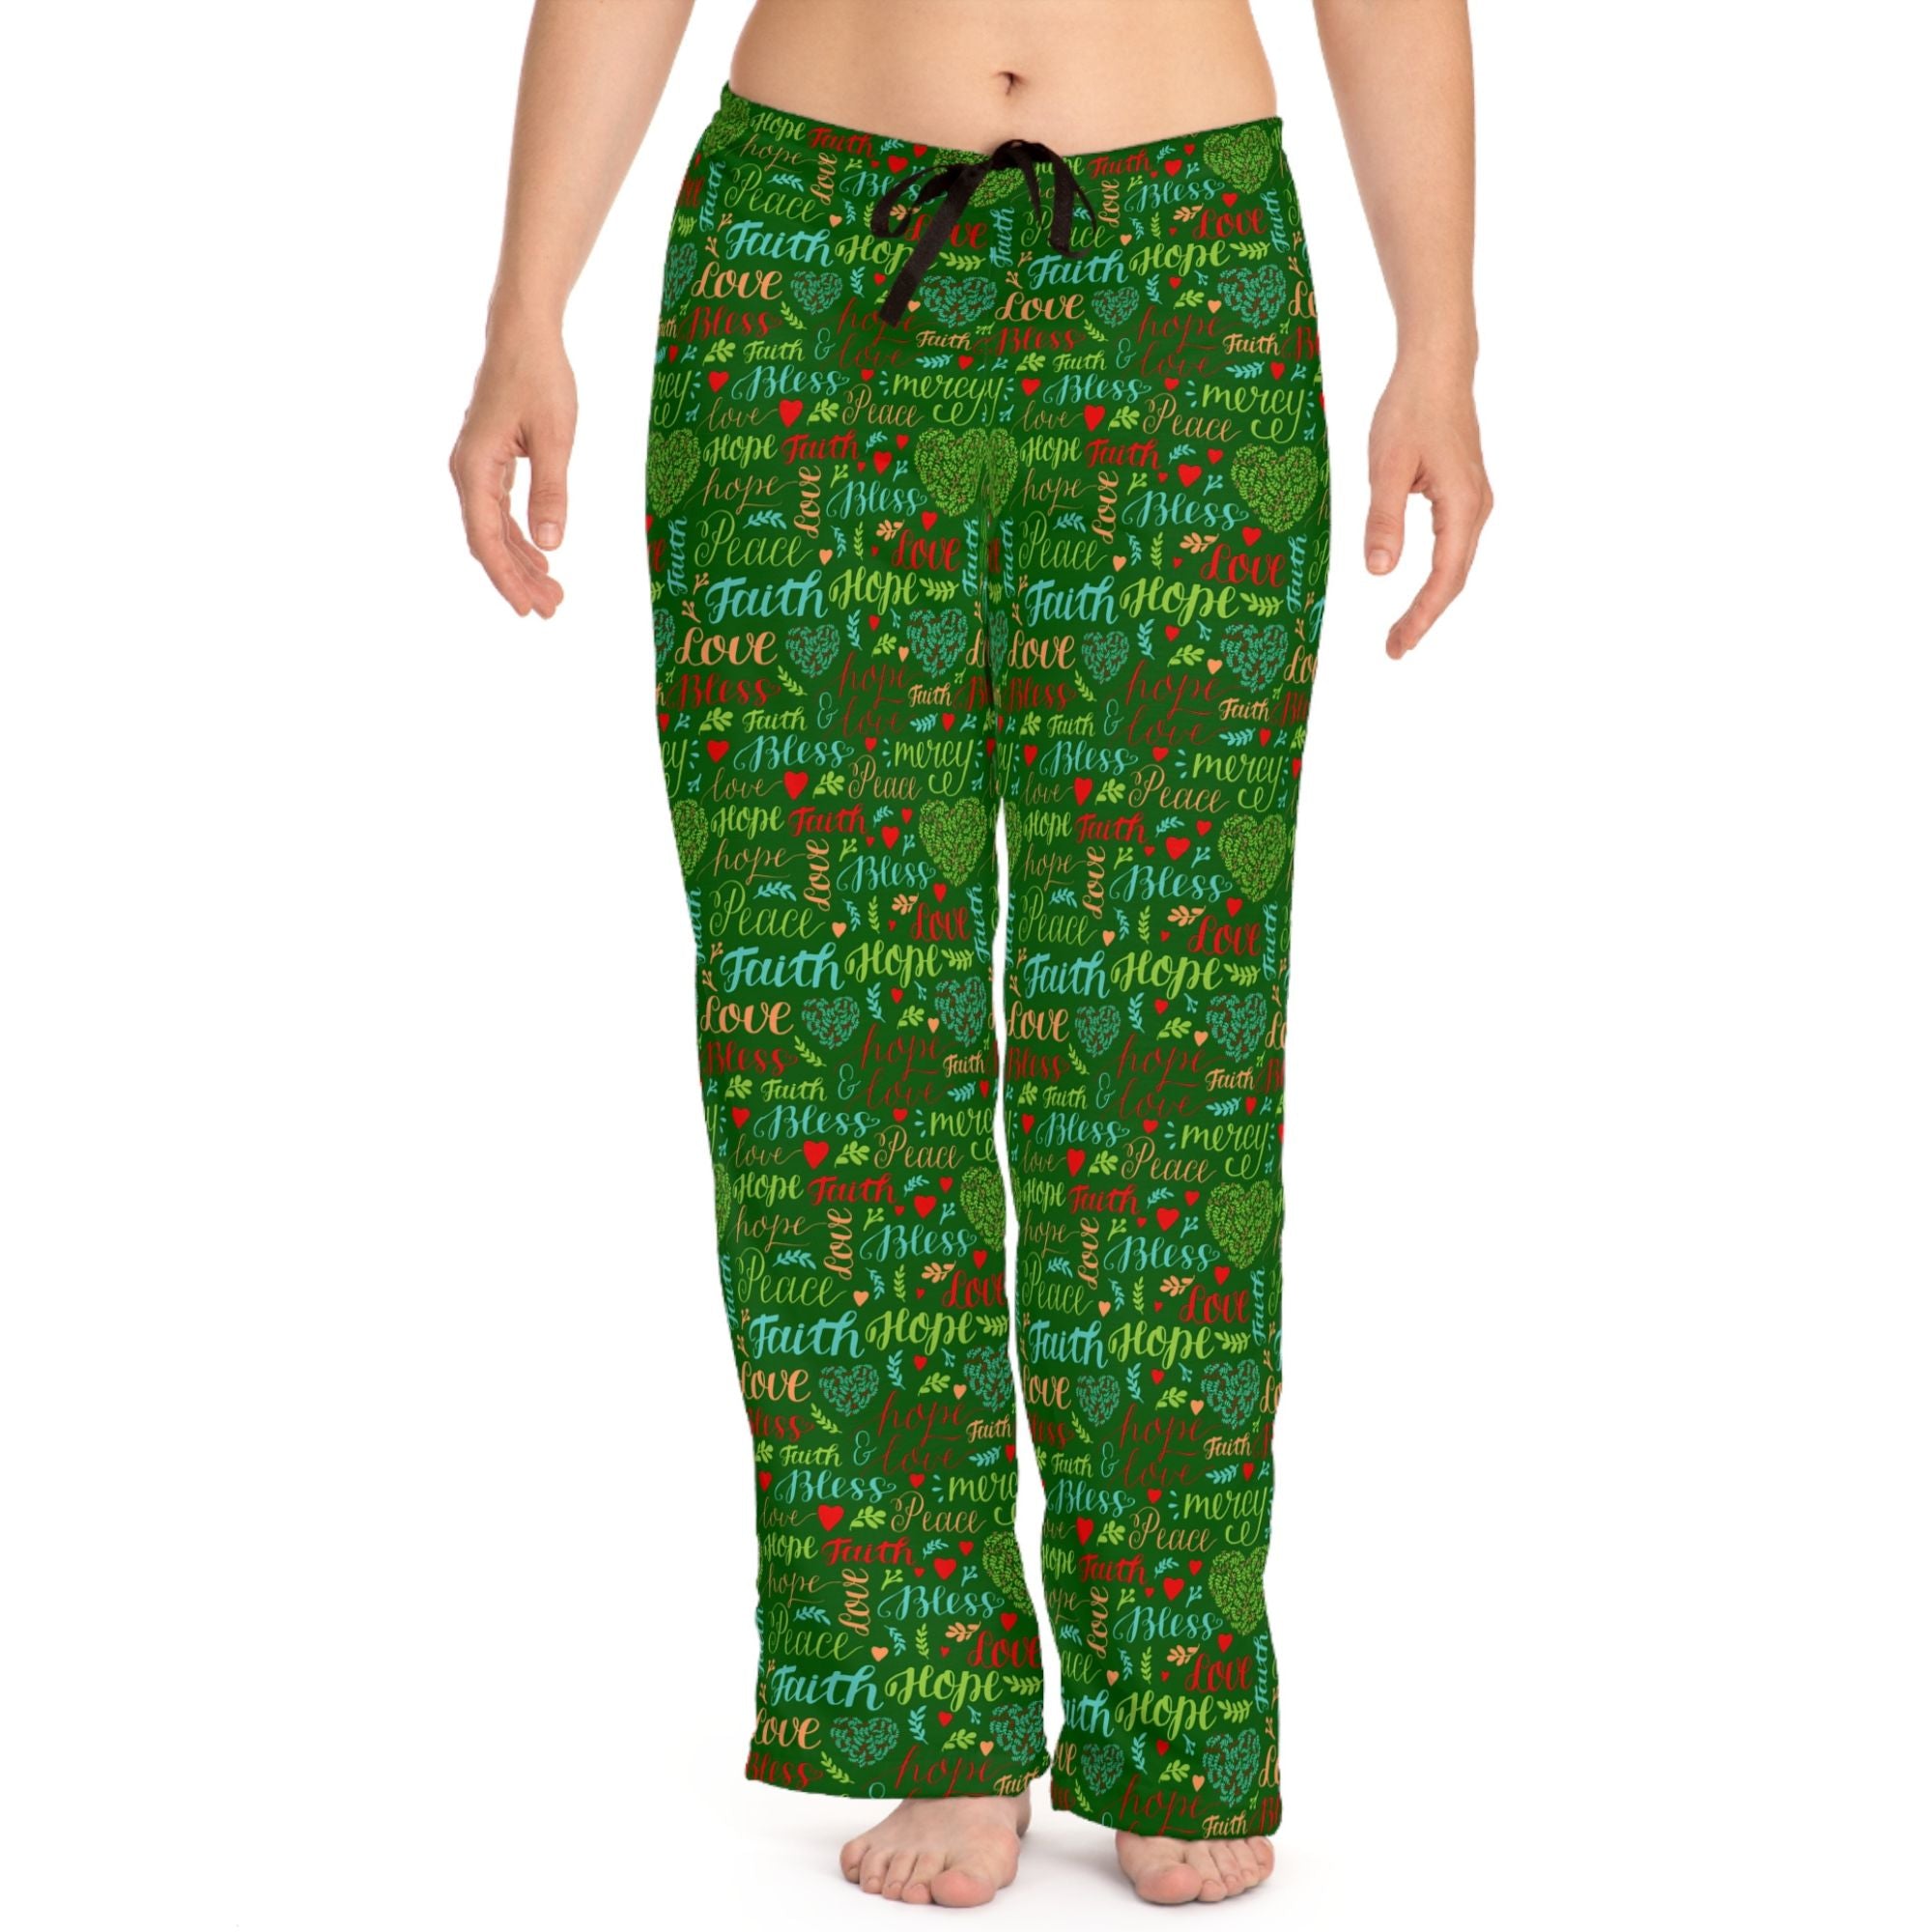 Mercy Peace Hope & Love Women's Green Lounge / Pajama Pants - Matching Pajama Set and Indoor Slippers Available Size: XS Color: White stitching Jesus Passion Apparel